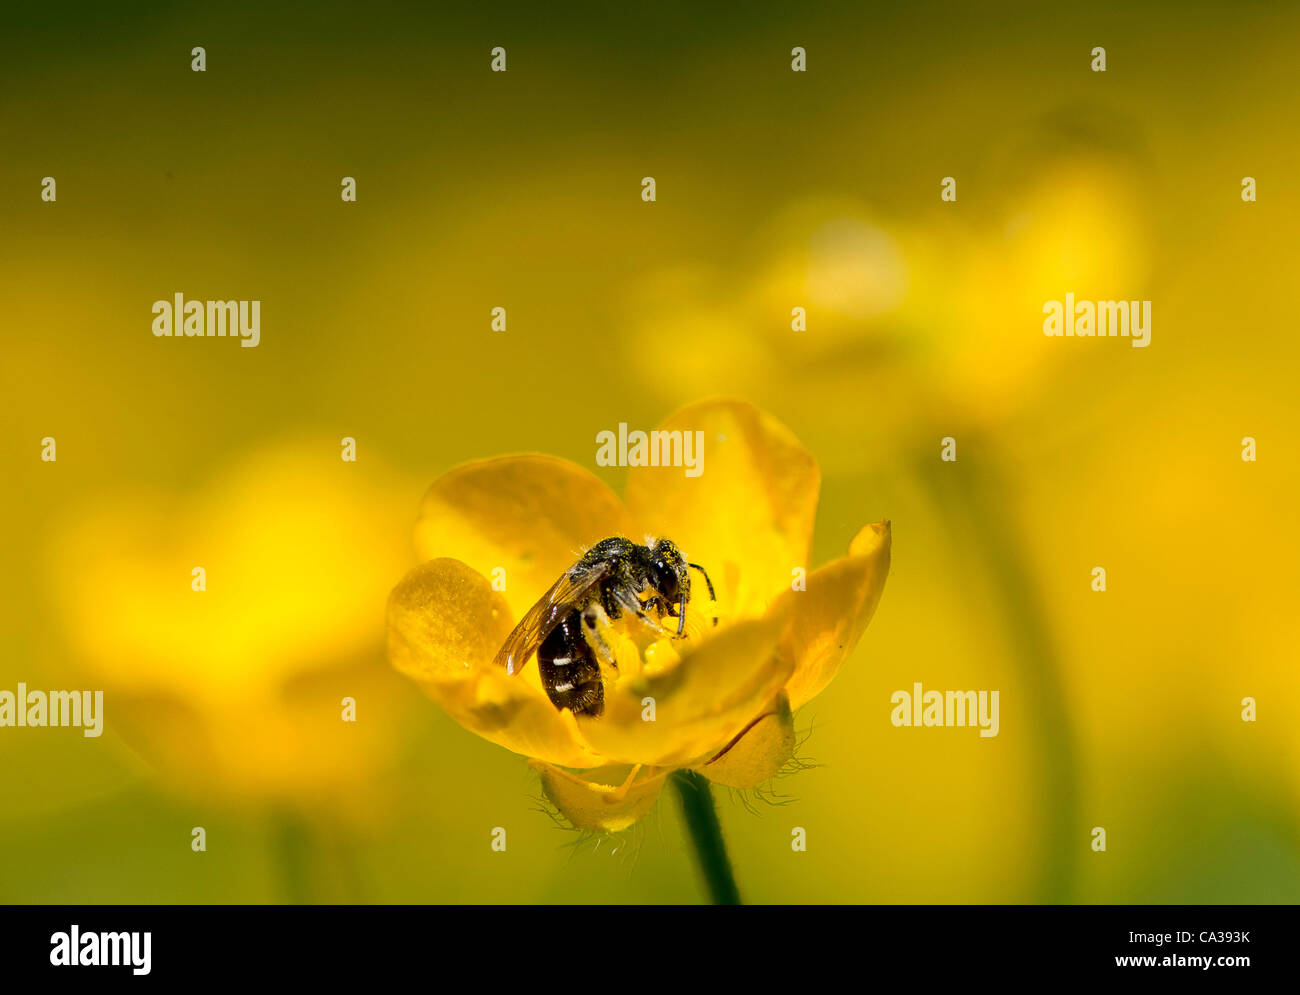 May 30, 2012 - Roseburg, Oregon, U.S - A small pollen covered sweat bee alights on a yellow wildflower growing in a field at River Forks County Park near Roseburg. Sweat bees are part of a large family of small bees found in most of the world except Australia and Southeast Asia. Sweat bees are consi Stock Photo